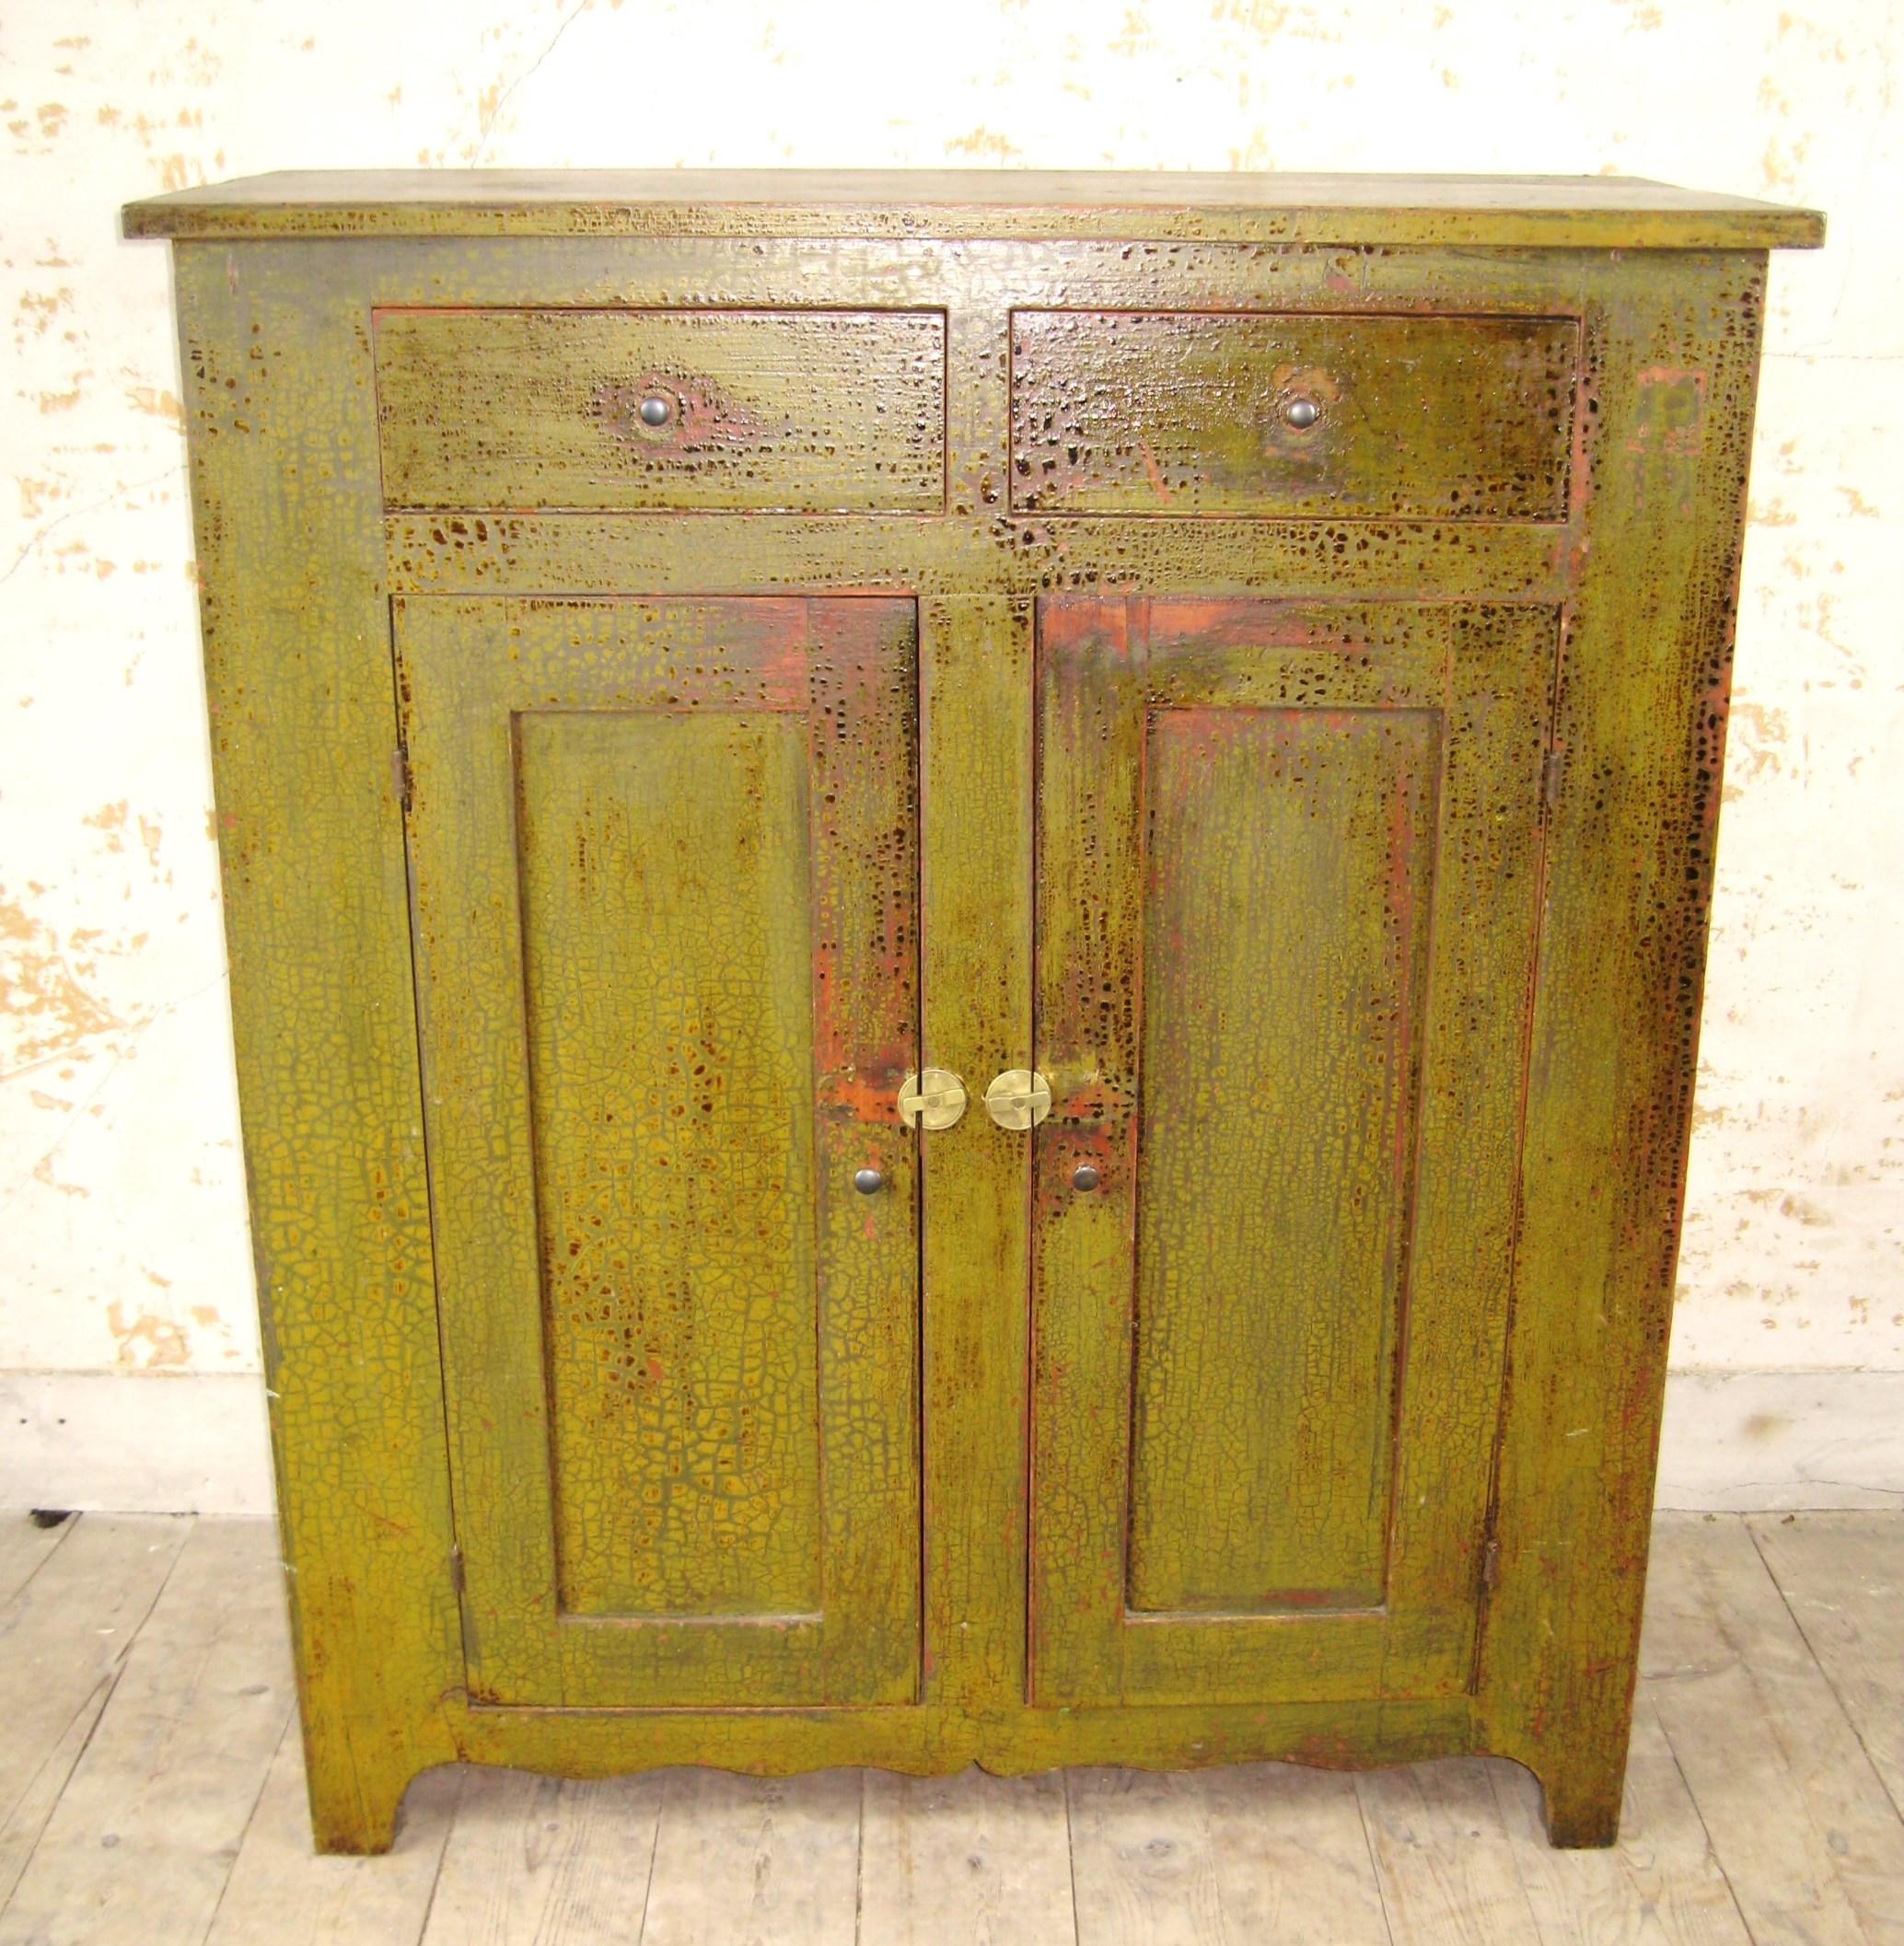 Fabulous Blind door 2 draw green painted 1860s cupboard, it has many layers of paint which are worn through in many spots to reveal the original red wash. I have owned this piece in my personal collection for over 25 years. Please look at all the